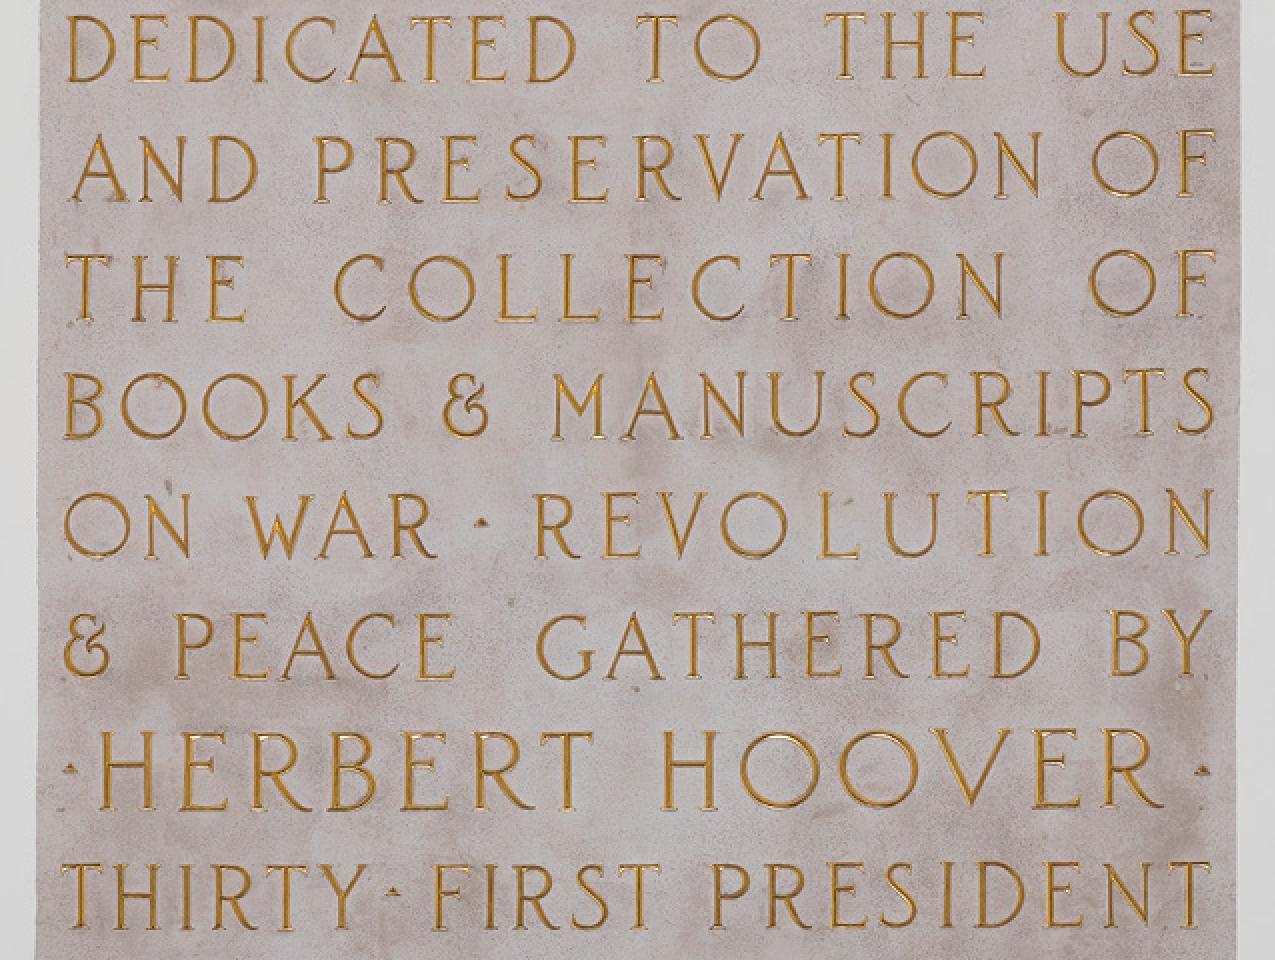 Inscription in Hoover Tower recognizing purpose of the Hoover Library & Archives collection